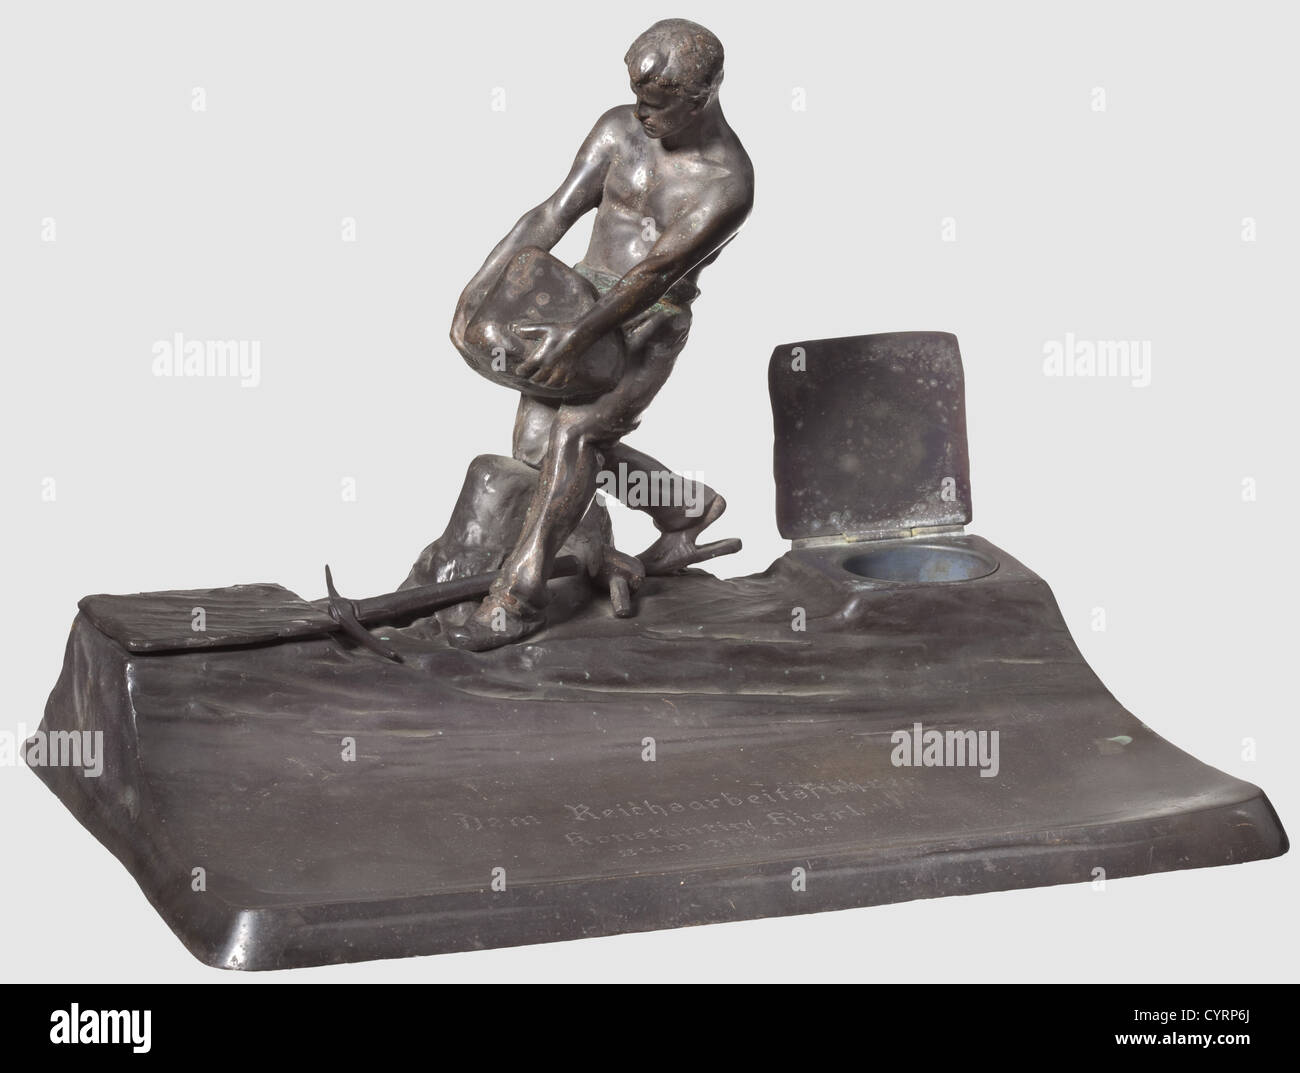 Konstantin Hierl,a presentation writing table set made of blackened bronze Modelled figure of a quarryman with pickaxe and sledgehammer between lidded containers for ink and blotting sand. Lateral artistïs signature 'L. Eisenberger'. The depositing surface engraved 'Dem Reichsarbeitsführer Konstantin Hierl zum 30.1.1935'(To Reich Labour Leader Konstantin Hierl on 30 January 1935). 33 x 22 x 23 cm,historic,historical,people,1930s,20th century,NS,National Socialism,Nazism,Third Reich,German Reich,Germany,German,National Socialist,Nazi,Nazi period,Additional-Rights-Clearences-Not Available Stock Photo